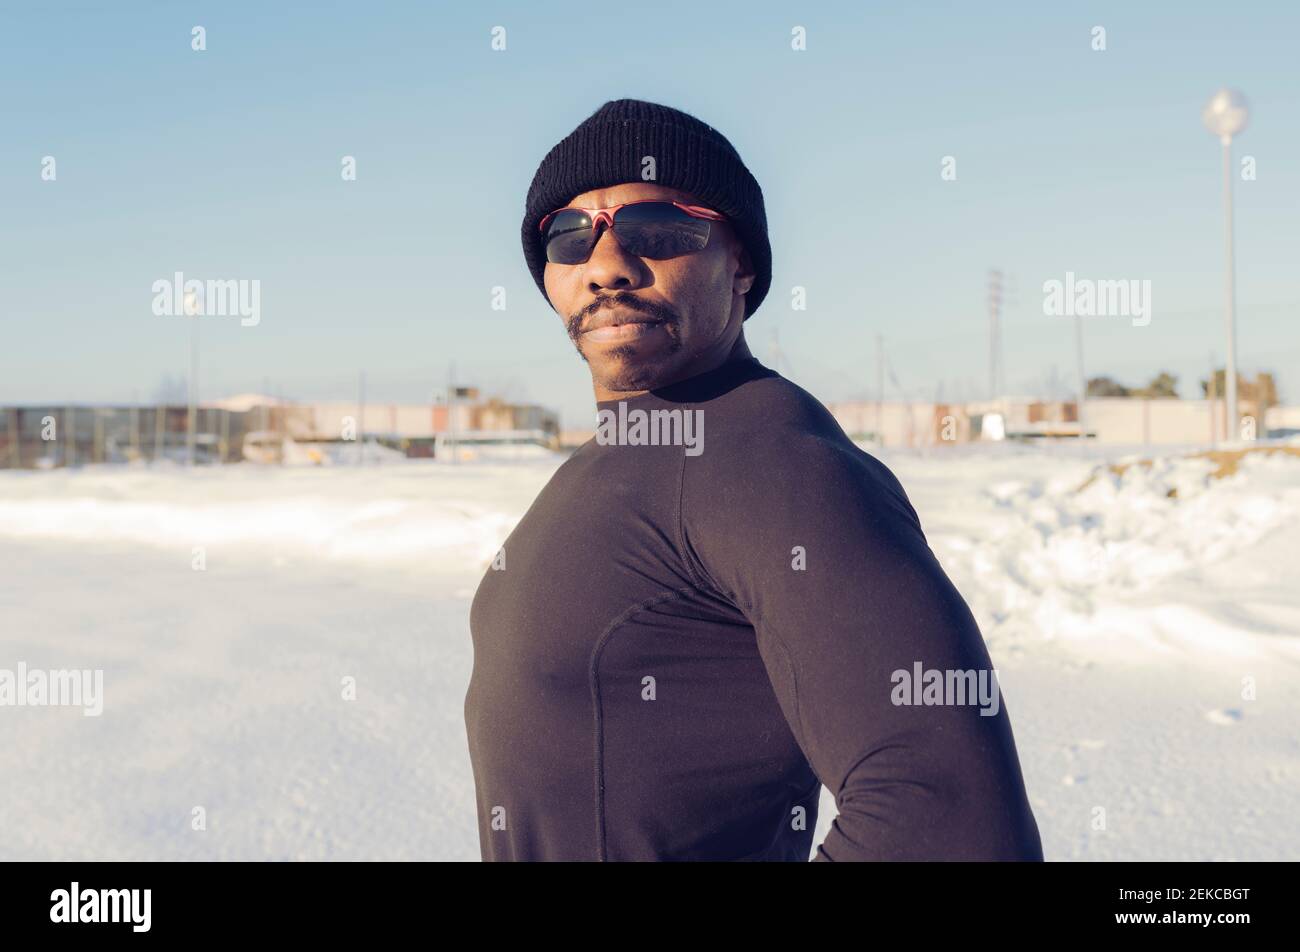 Muscular build sportsman wearing sunglasses standing in snow during sunny day Stock Photo